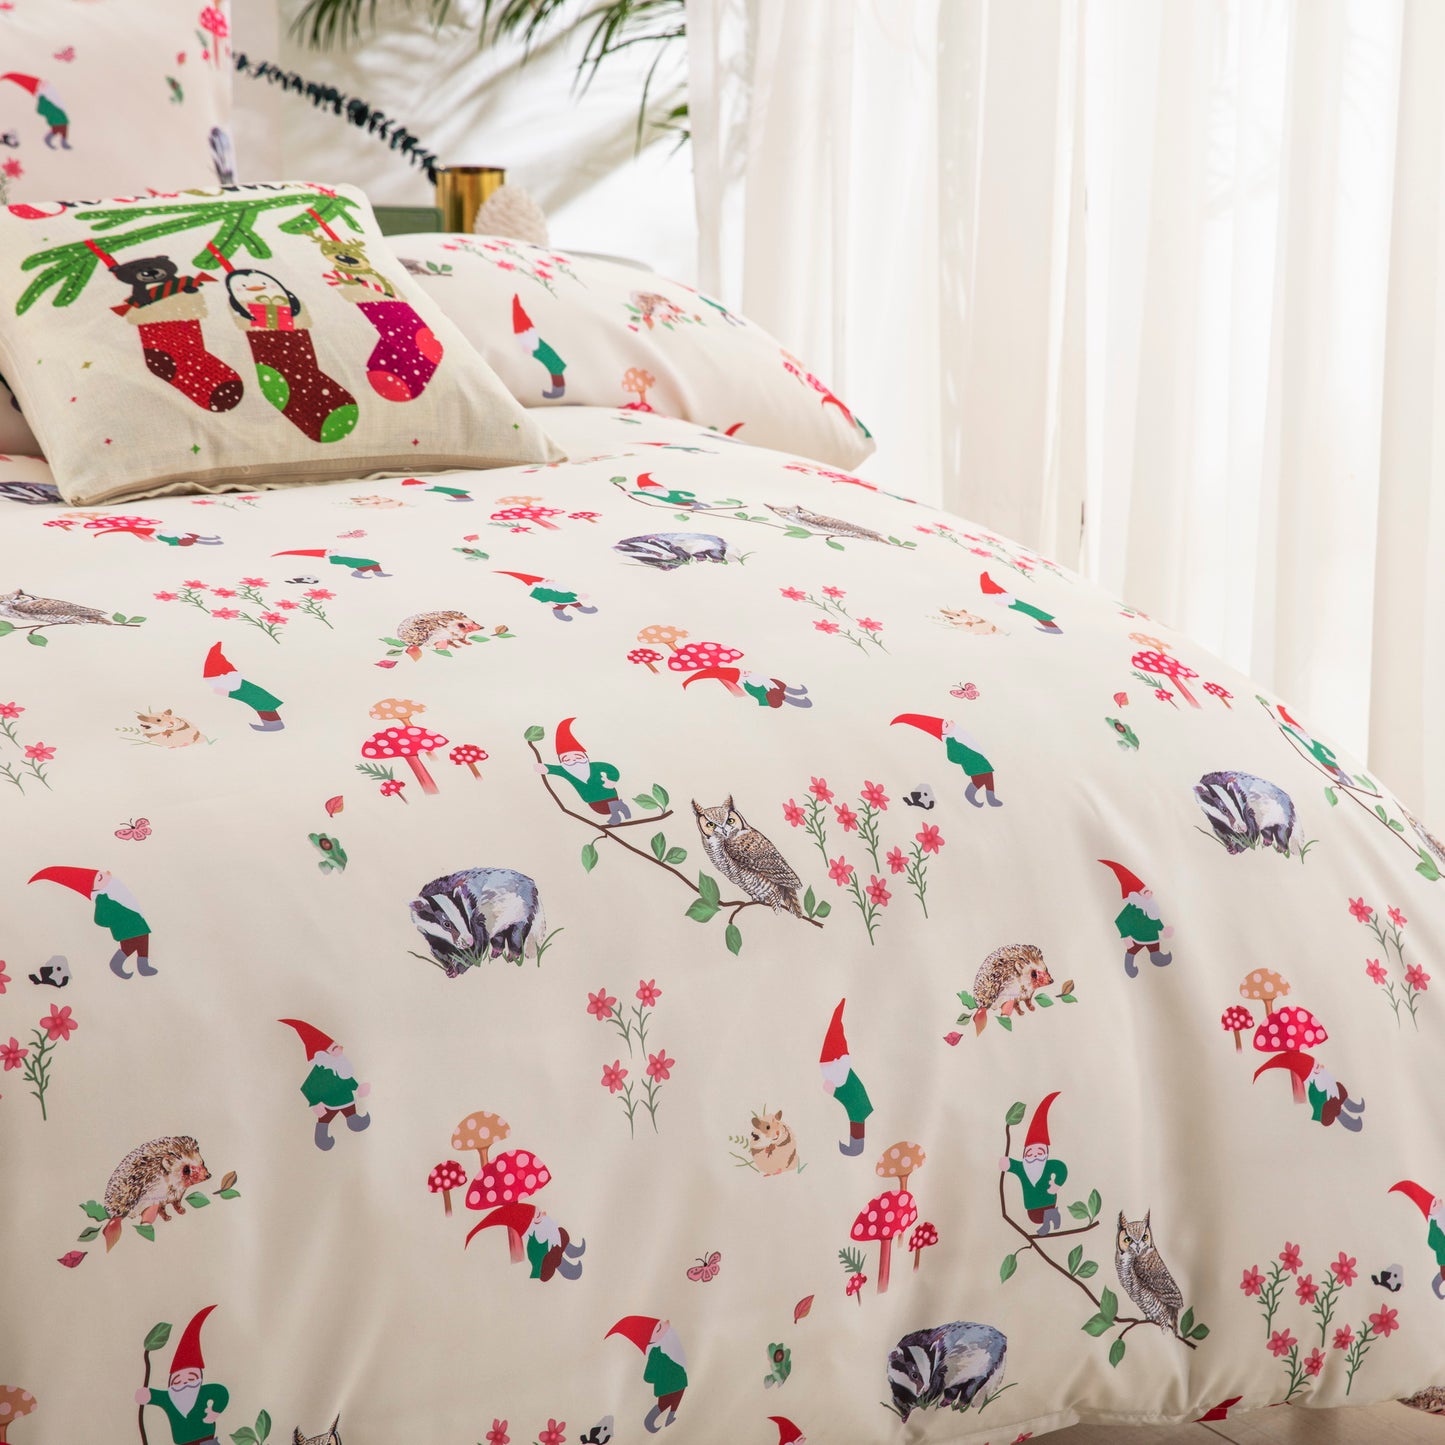 WONGS BEDDING Double-sided Christmas Elements Duvet Cover Set